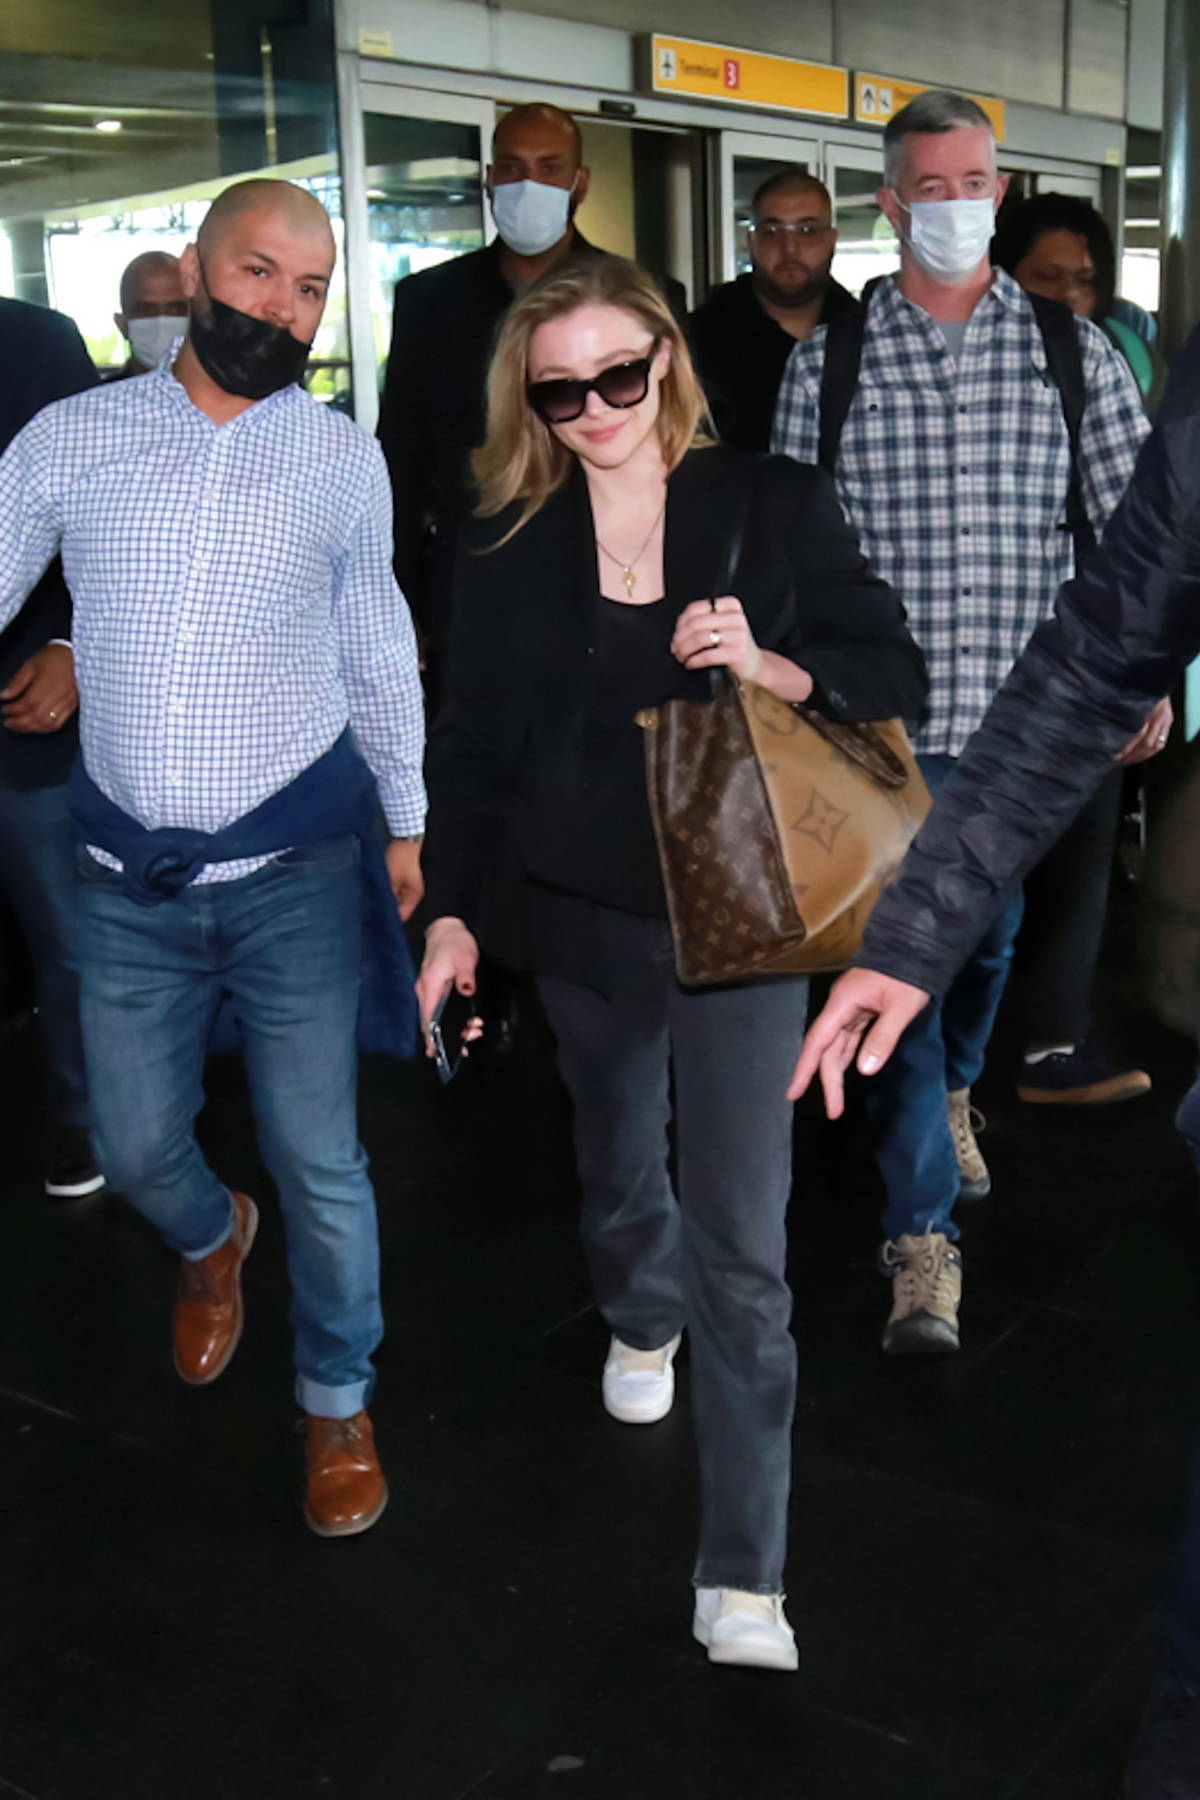 Chloe Grace Moretz spotted with her Louis Vuitton luggage as she